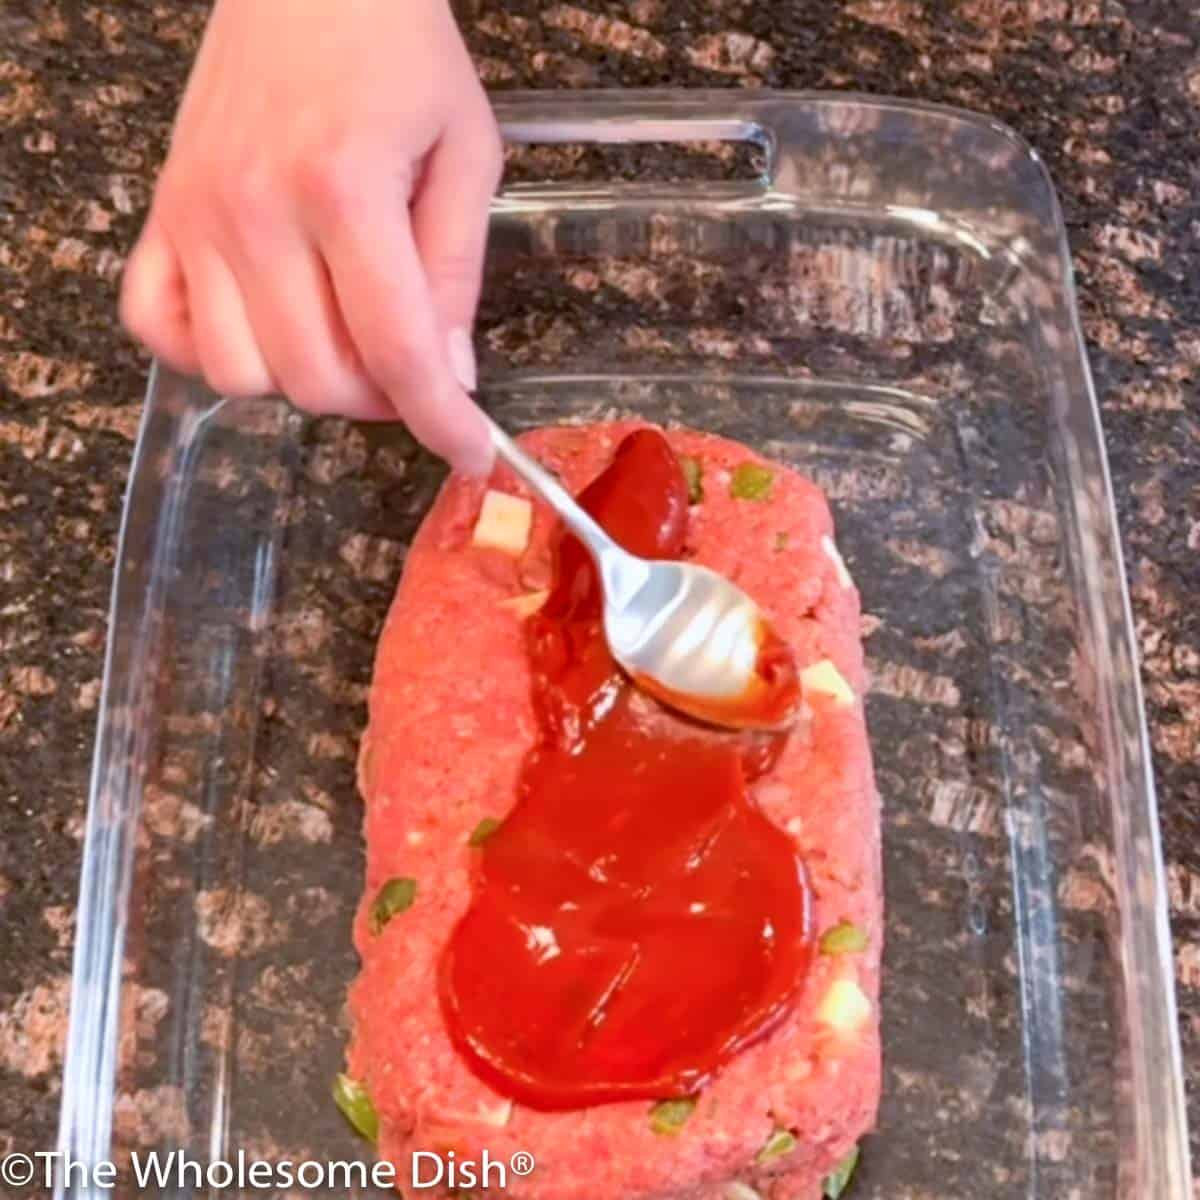 Spreading ketchup on an uncooked meatloaf.